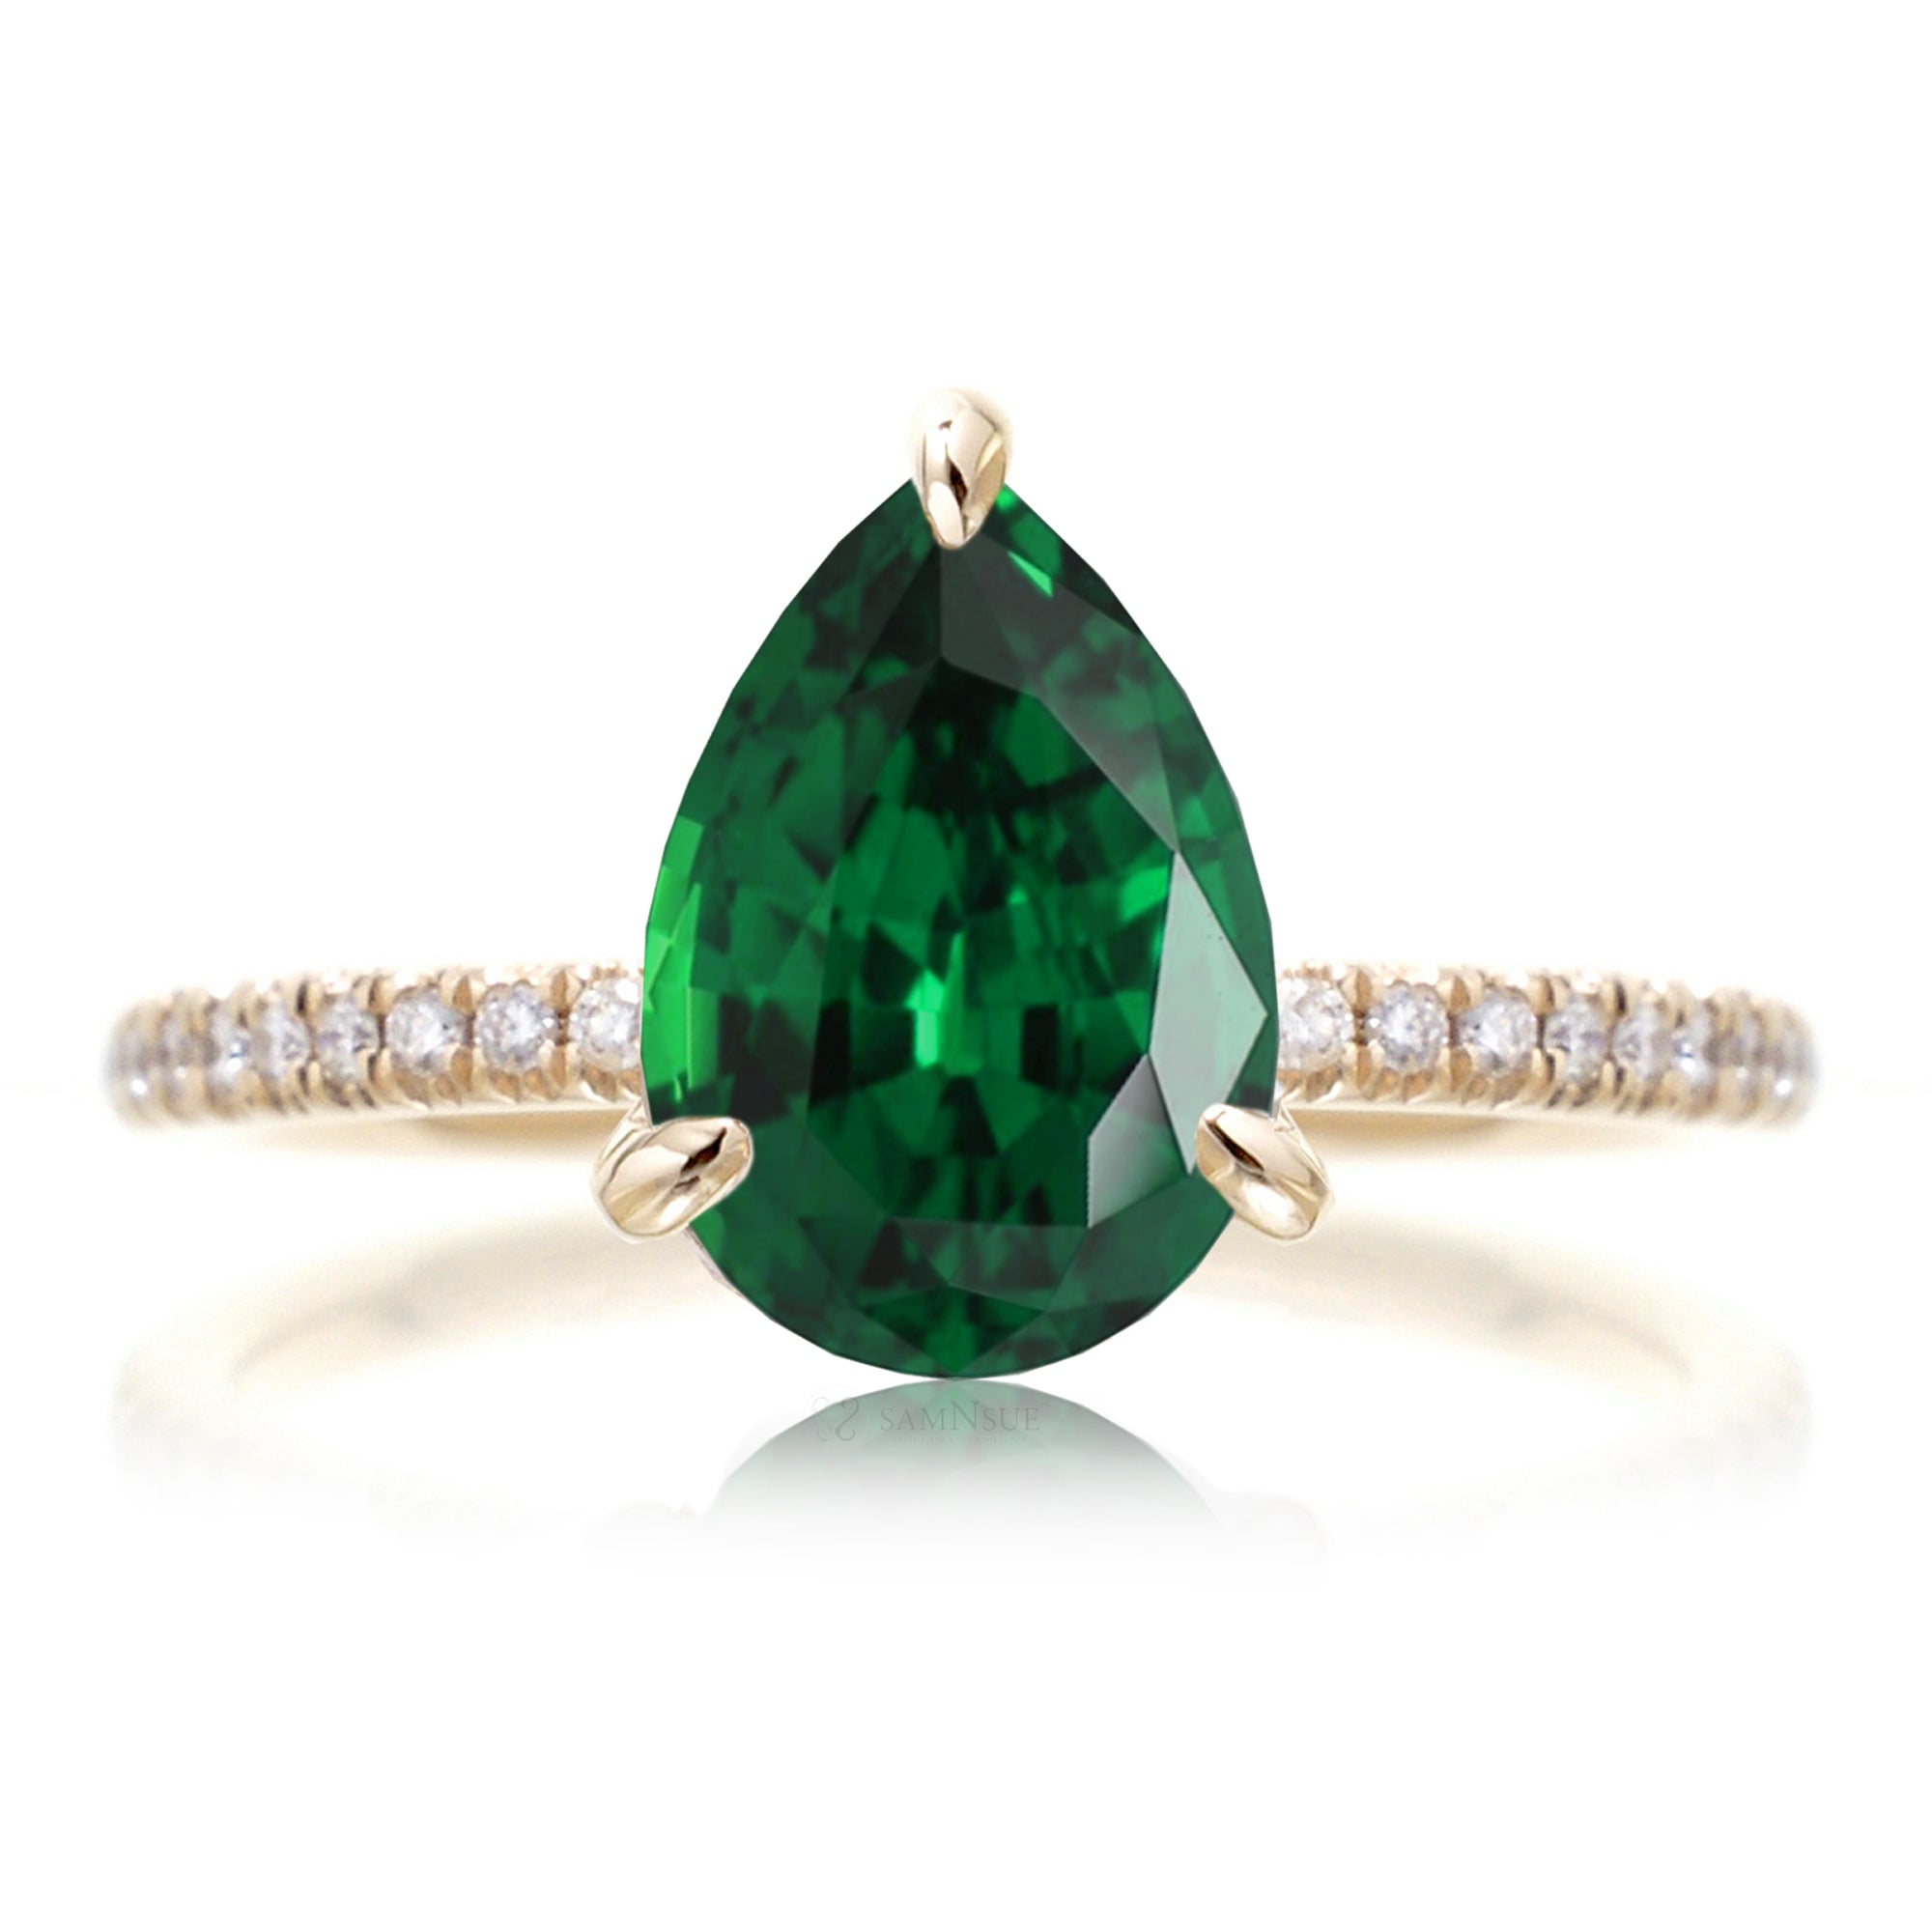 Pear green emerald diamond band engagement ring yellow gold - the Ava